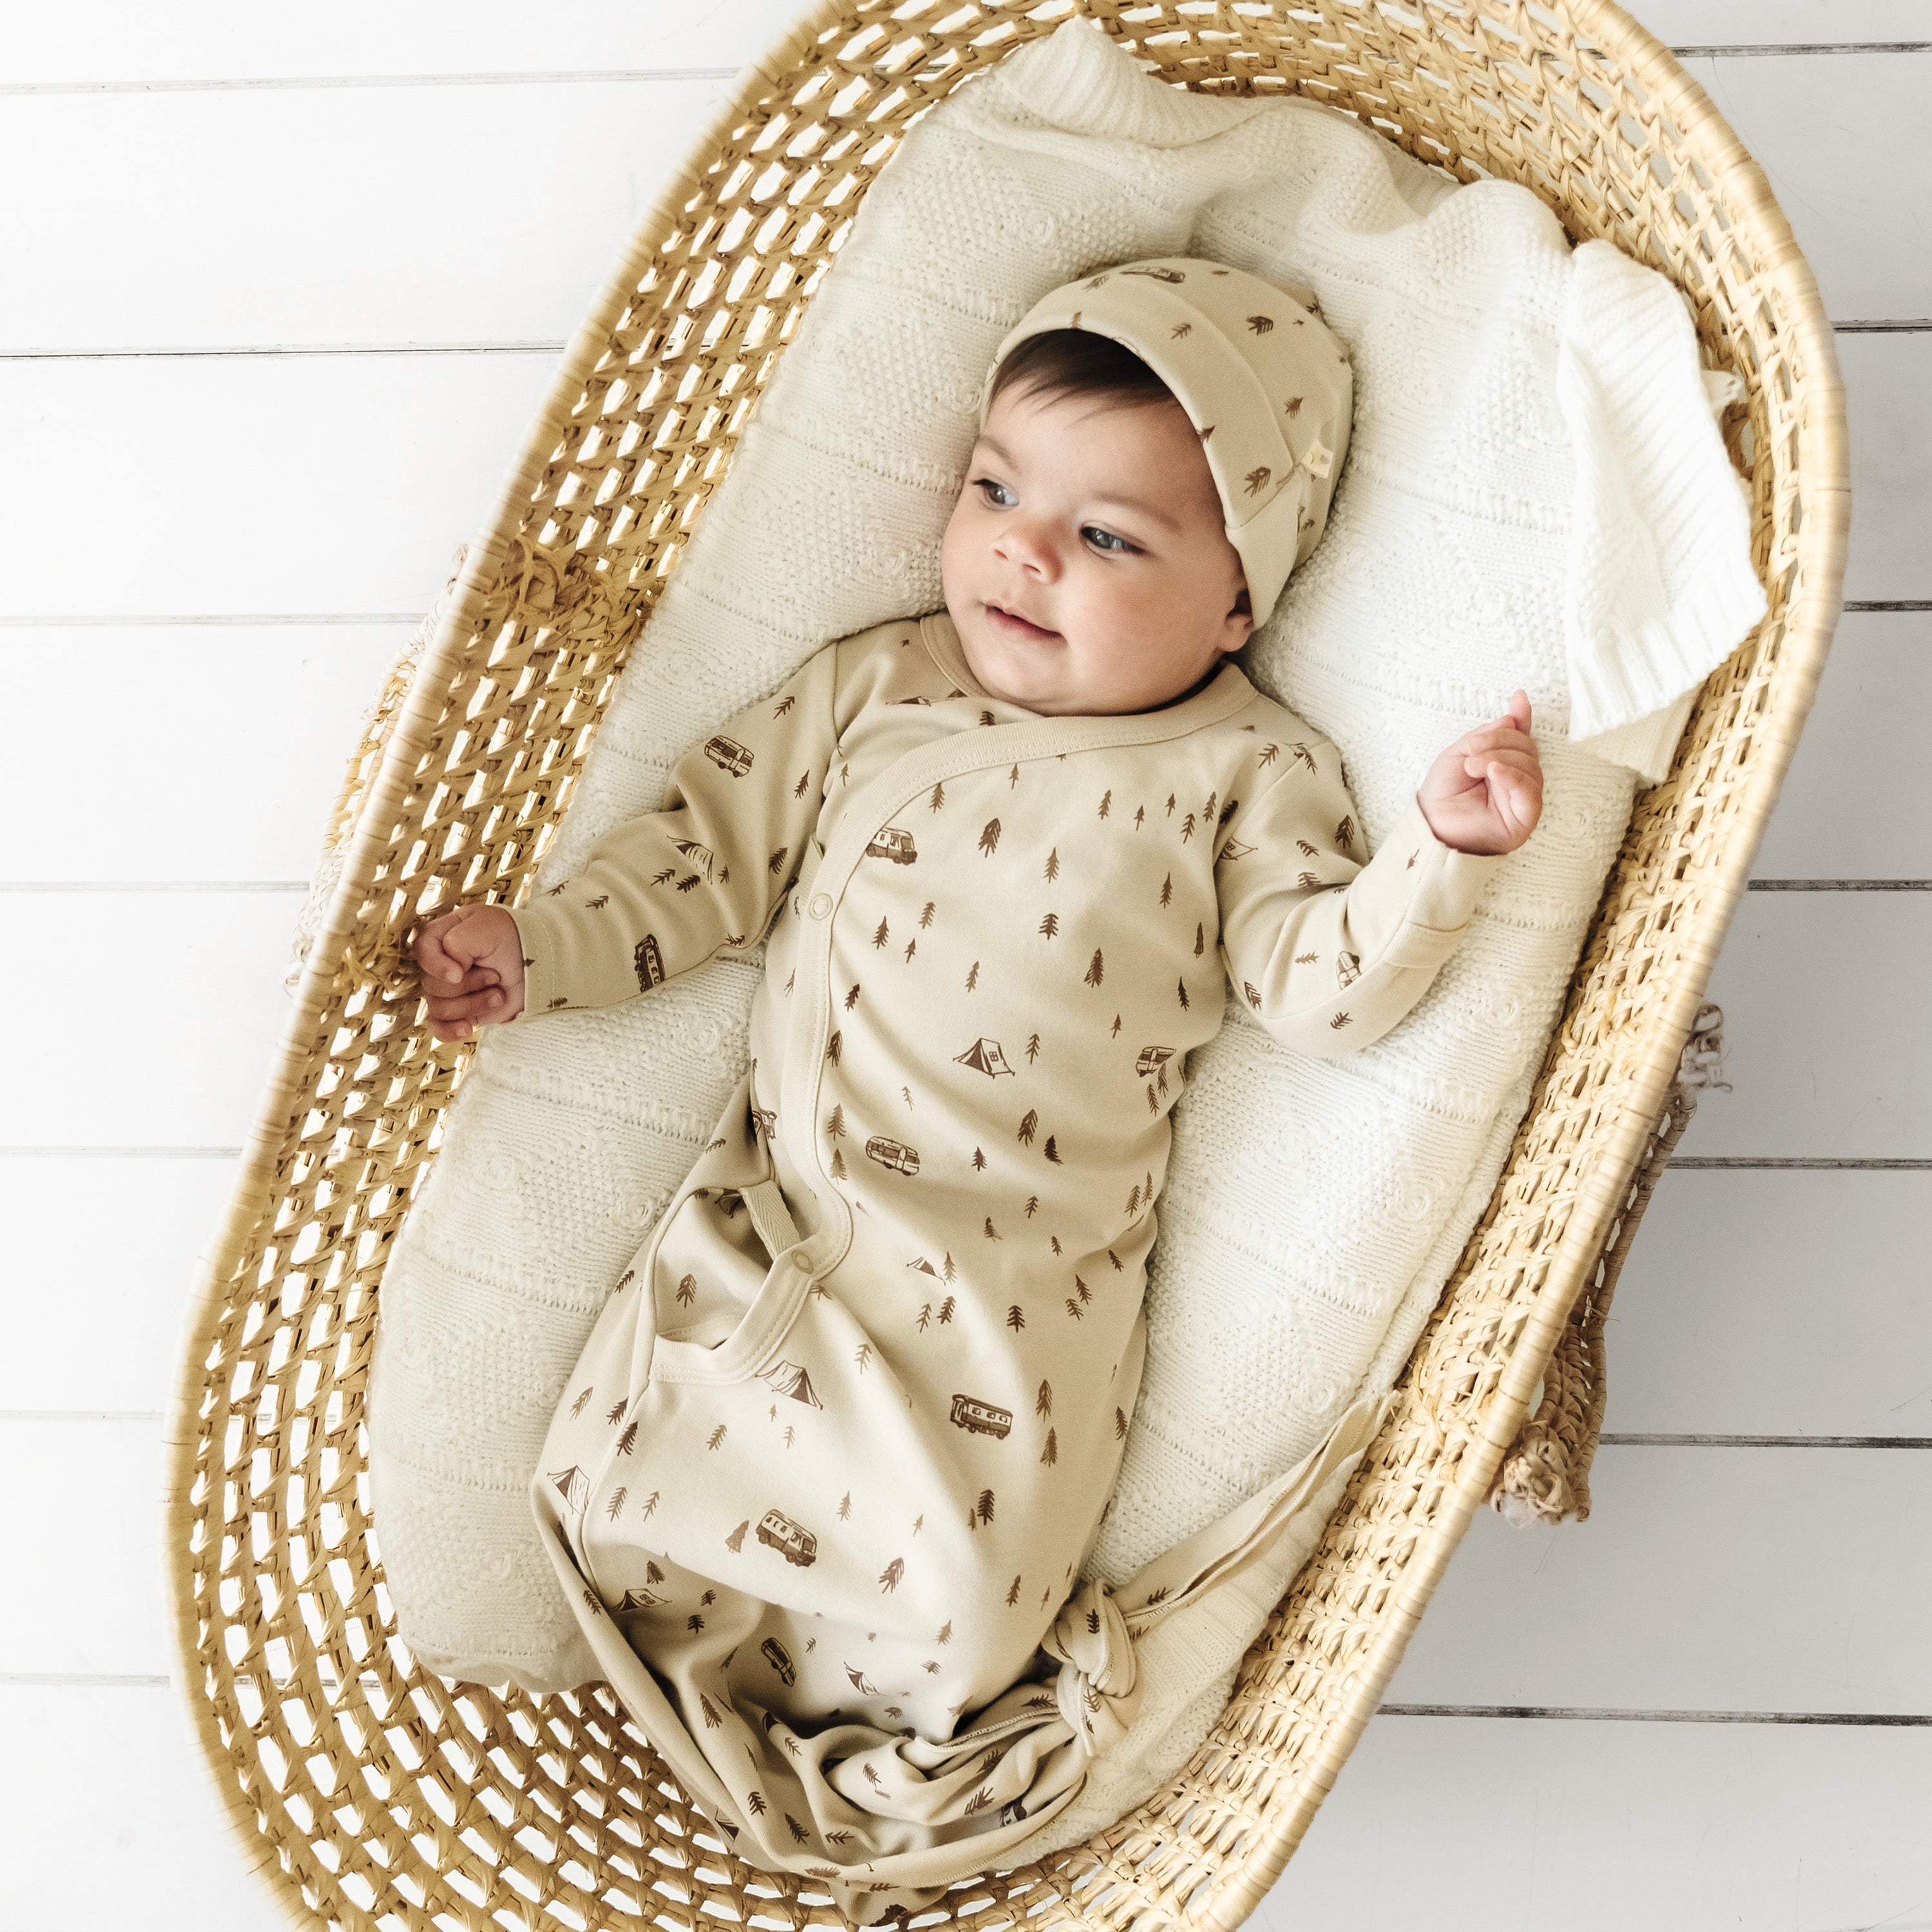 A baby in a beige Organic Baby Kimono Knotted Sleep Gown - Camplife with a hat lies comfortably inside a woven basket, placed on a white wooden floor. The onesie is adorned with tiny teepee patterns.